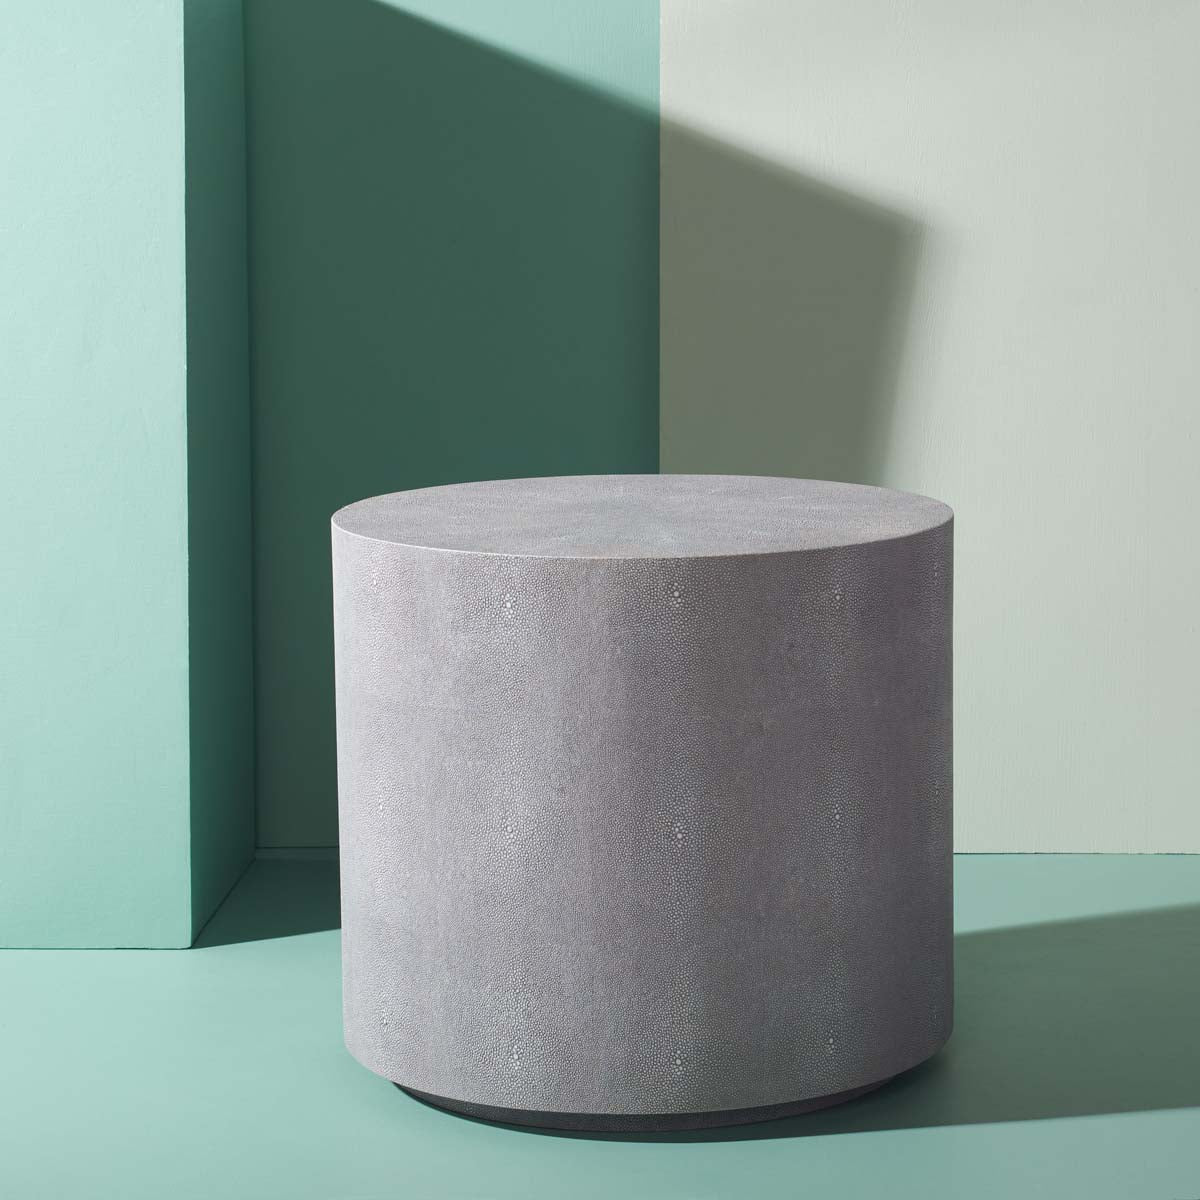 Safavieh Couture Diesel Faux Shagreen End Table